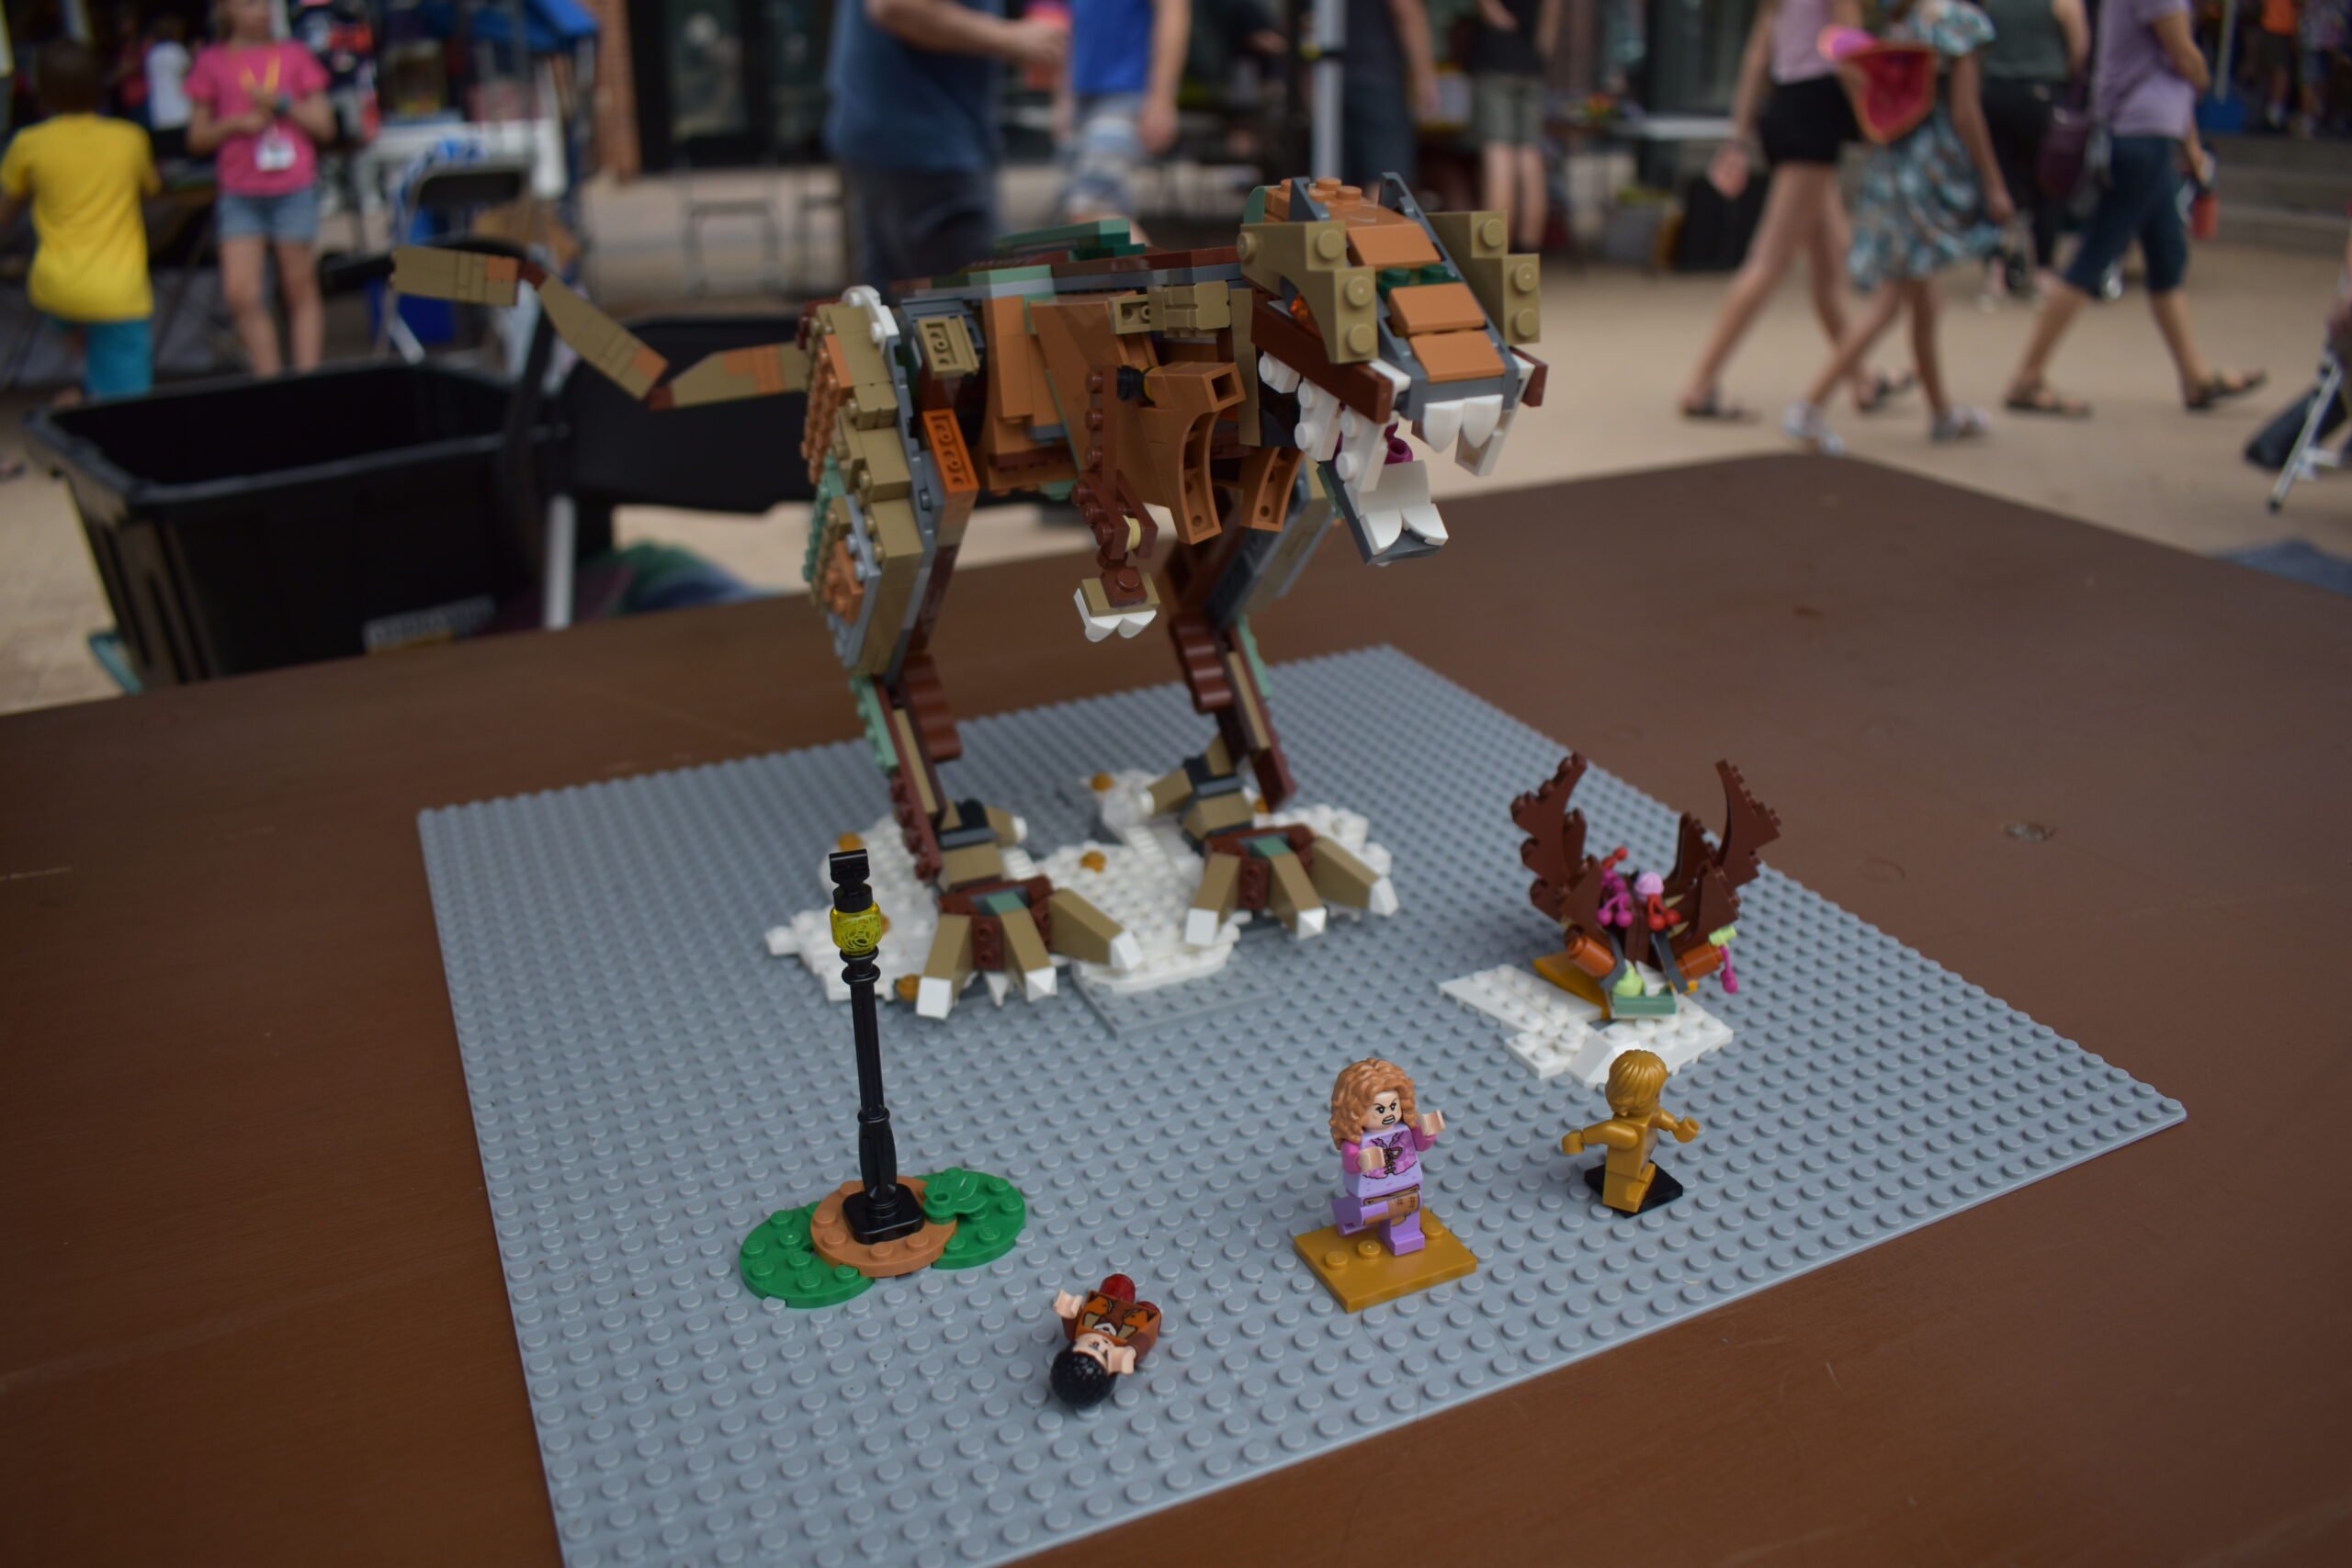 LEGO® creation of dinosaur and people running away